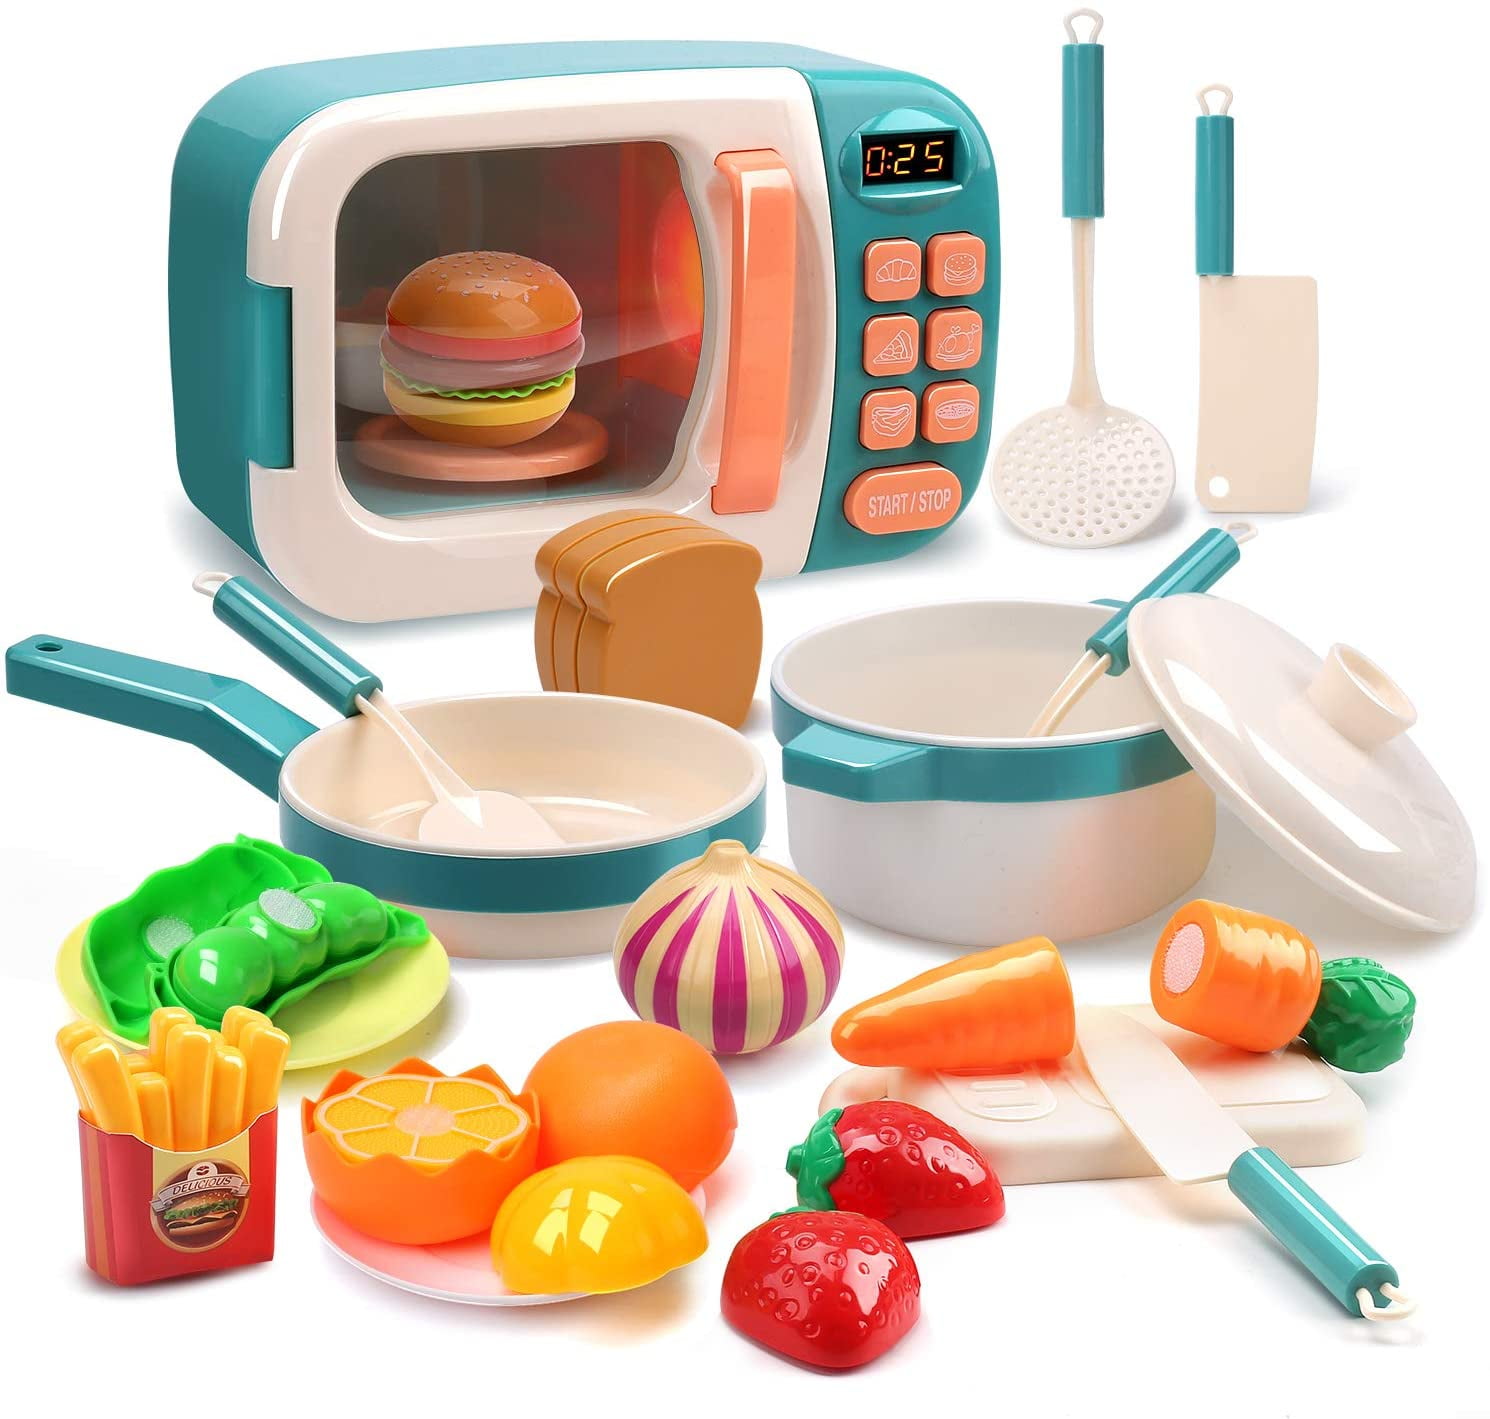 Kids Pots and Pans Kitchen Play Food Sets Hotdog Children Toys for Toddlers